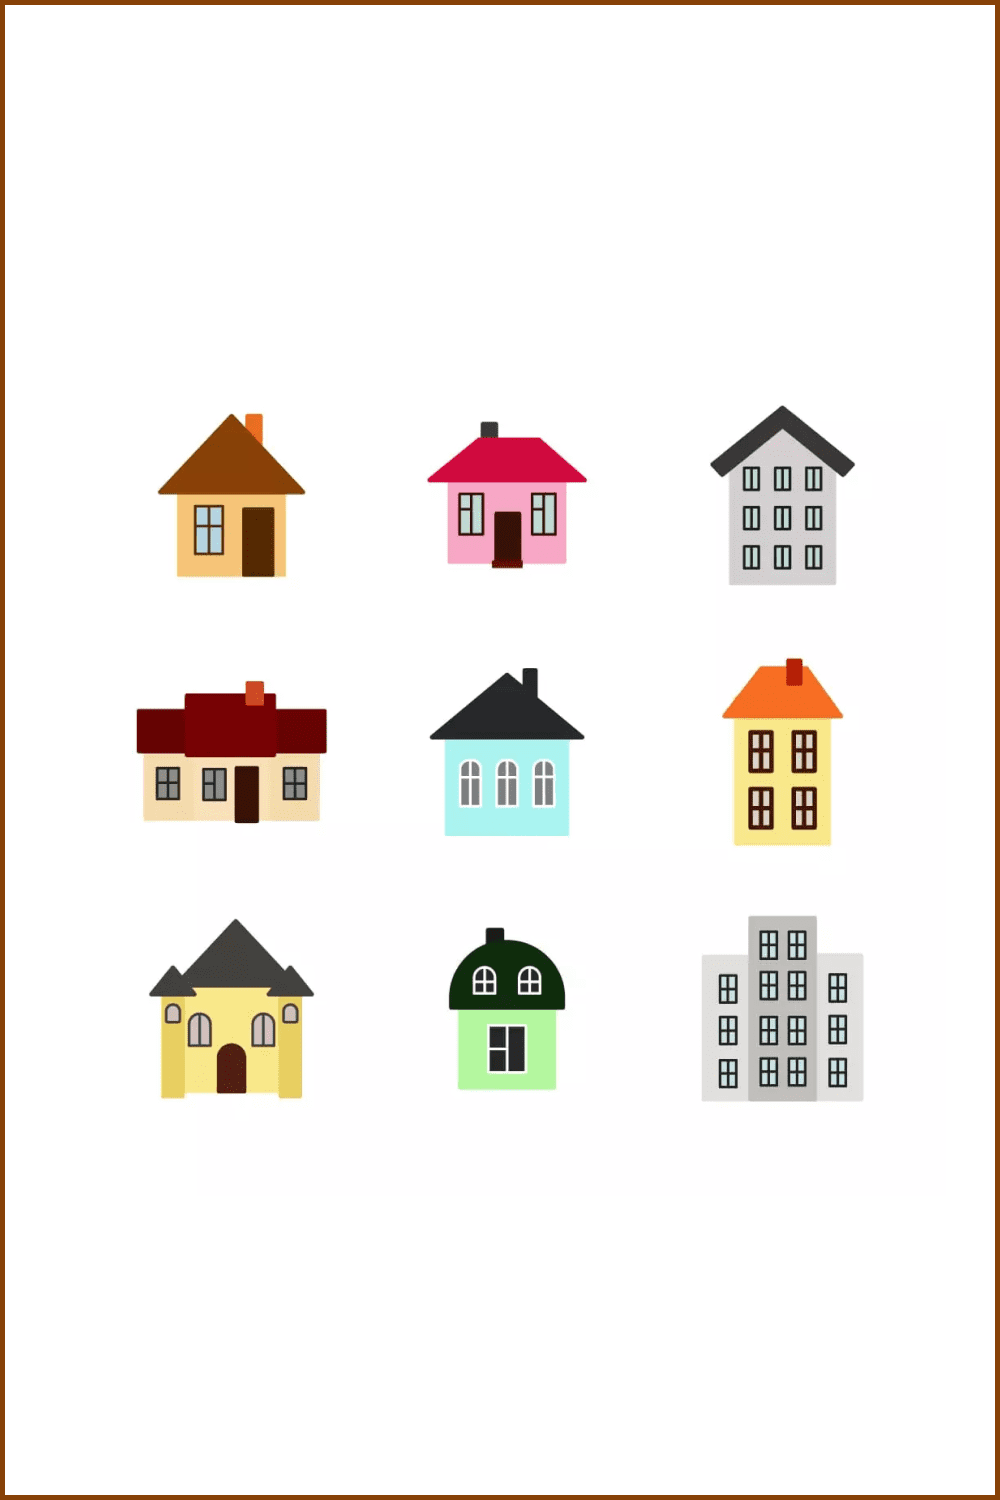 Collage of icons of houses, high-rise buildings of different colors and sizes.